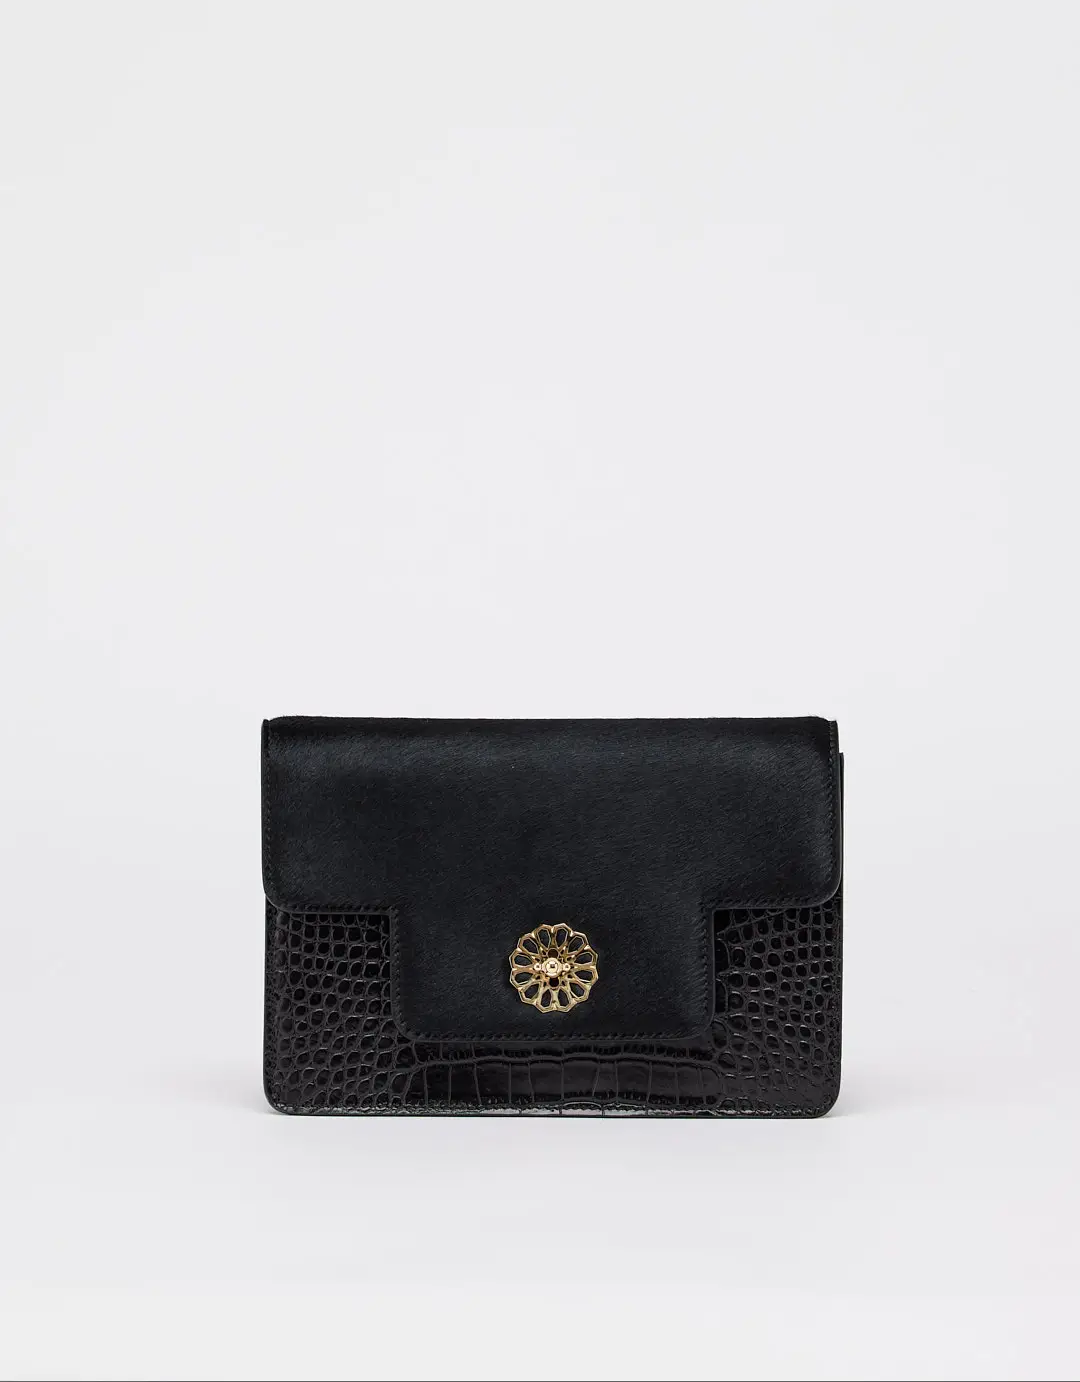 This feminine shoulder bag with a flap is made of calf leather and fur. The Andalous with Croco print is handcrafted from high-quality materials and will turn heads wherever you go. This elegant small bag features an additional storage compartment closed with a zipper, a leather handle, and a mosaic golden magnetic closure, making it both fashionable and functional.